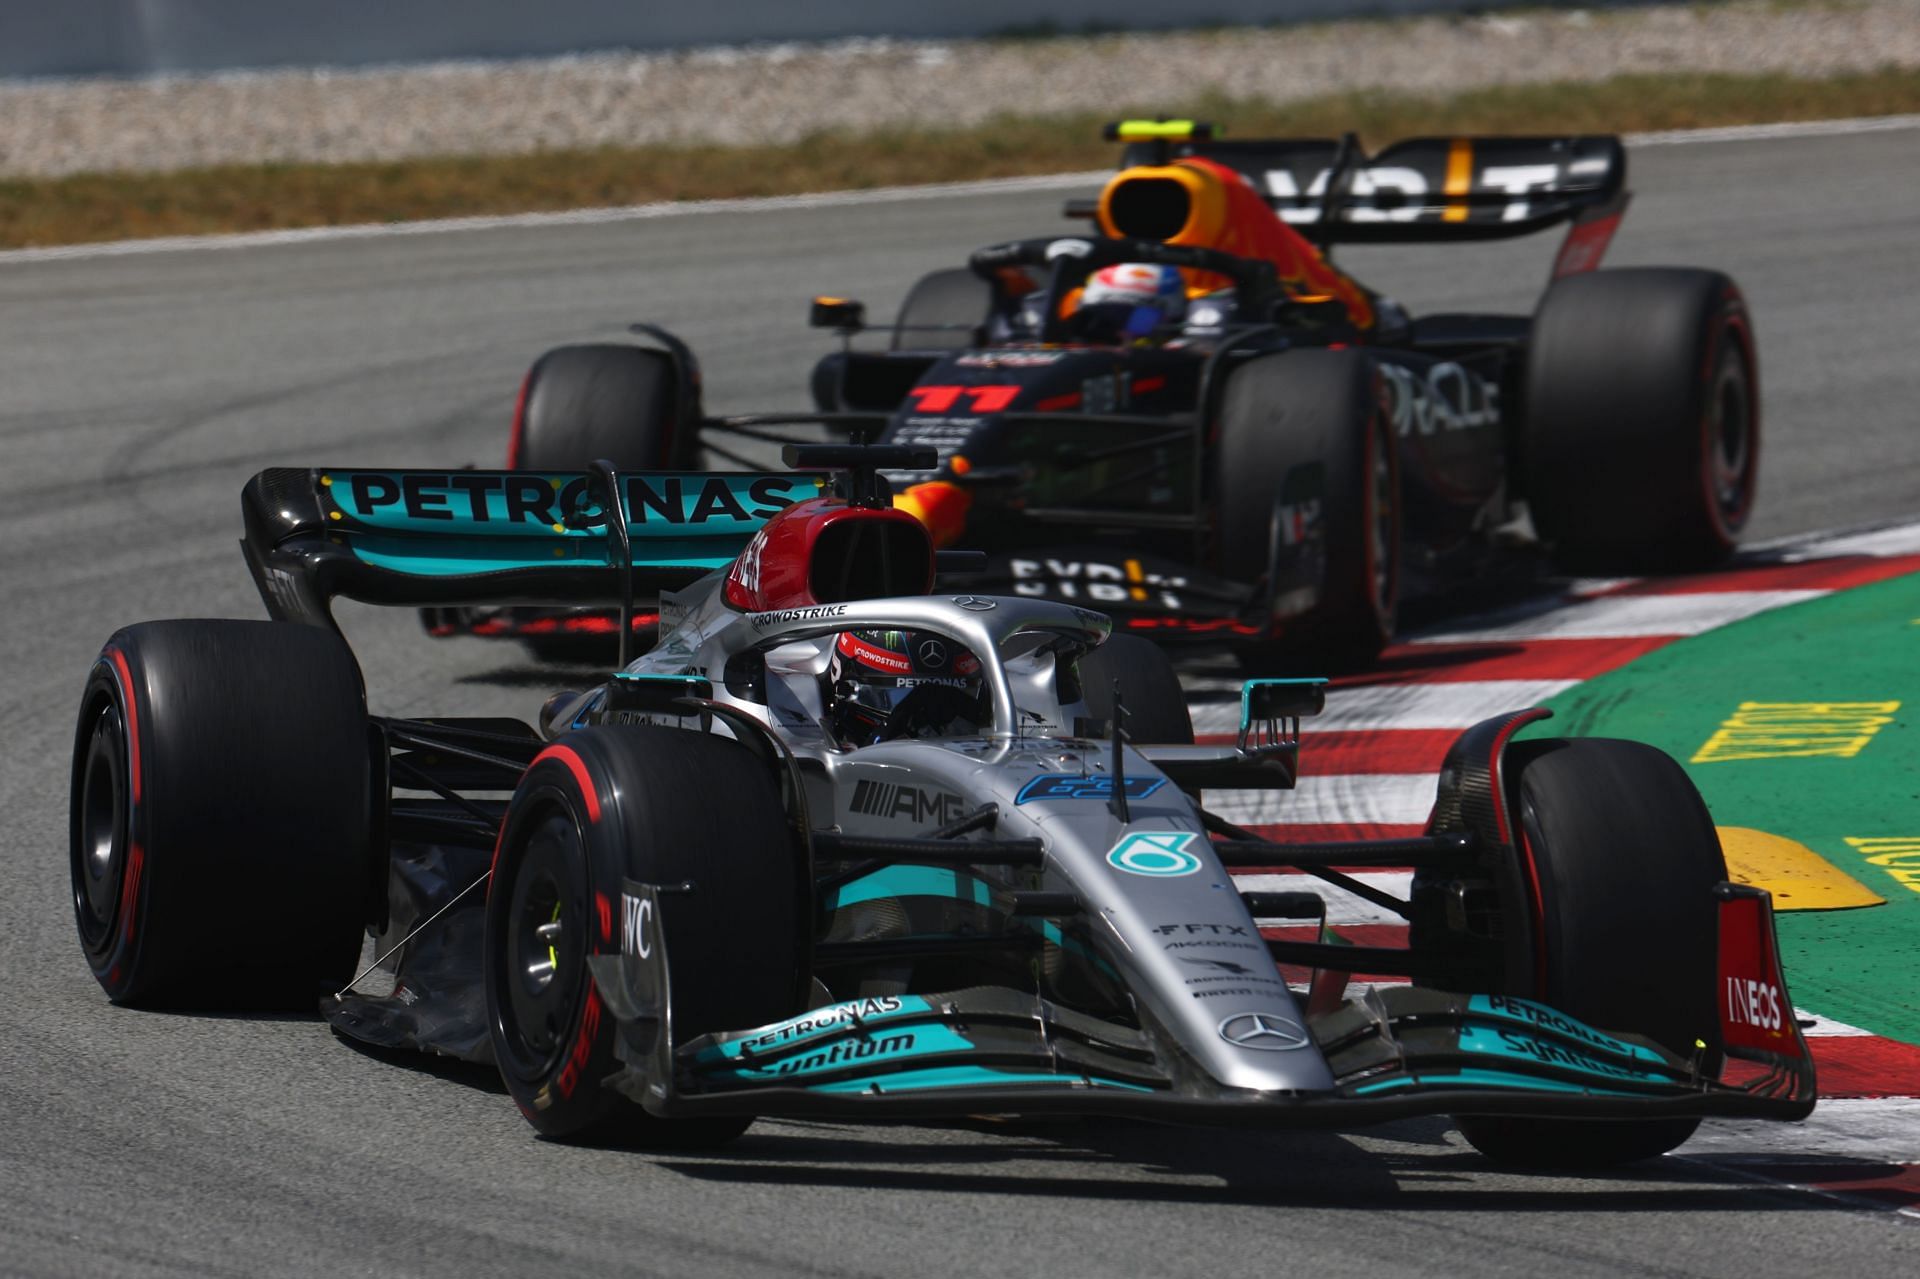 George Russell (#63) Mercedes W13 leading the 2022 Spanish GP